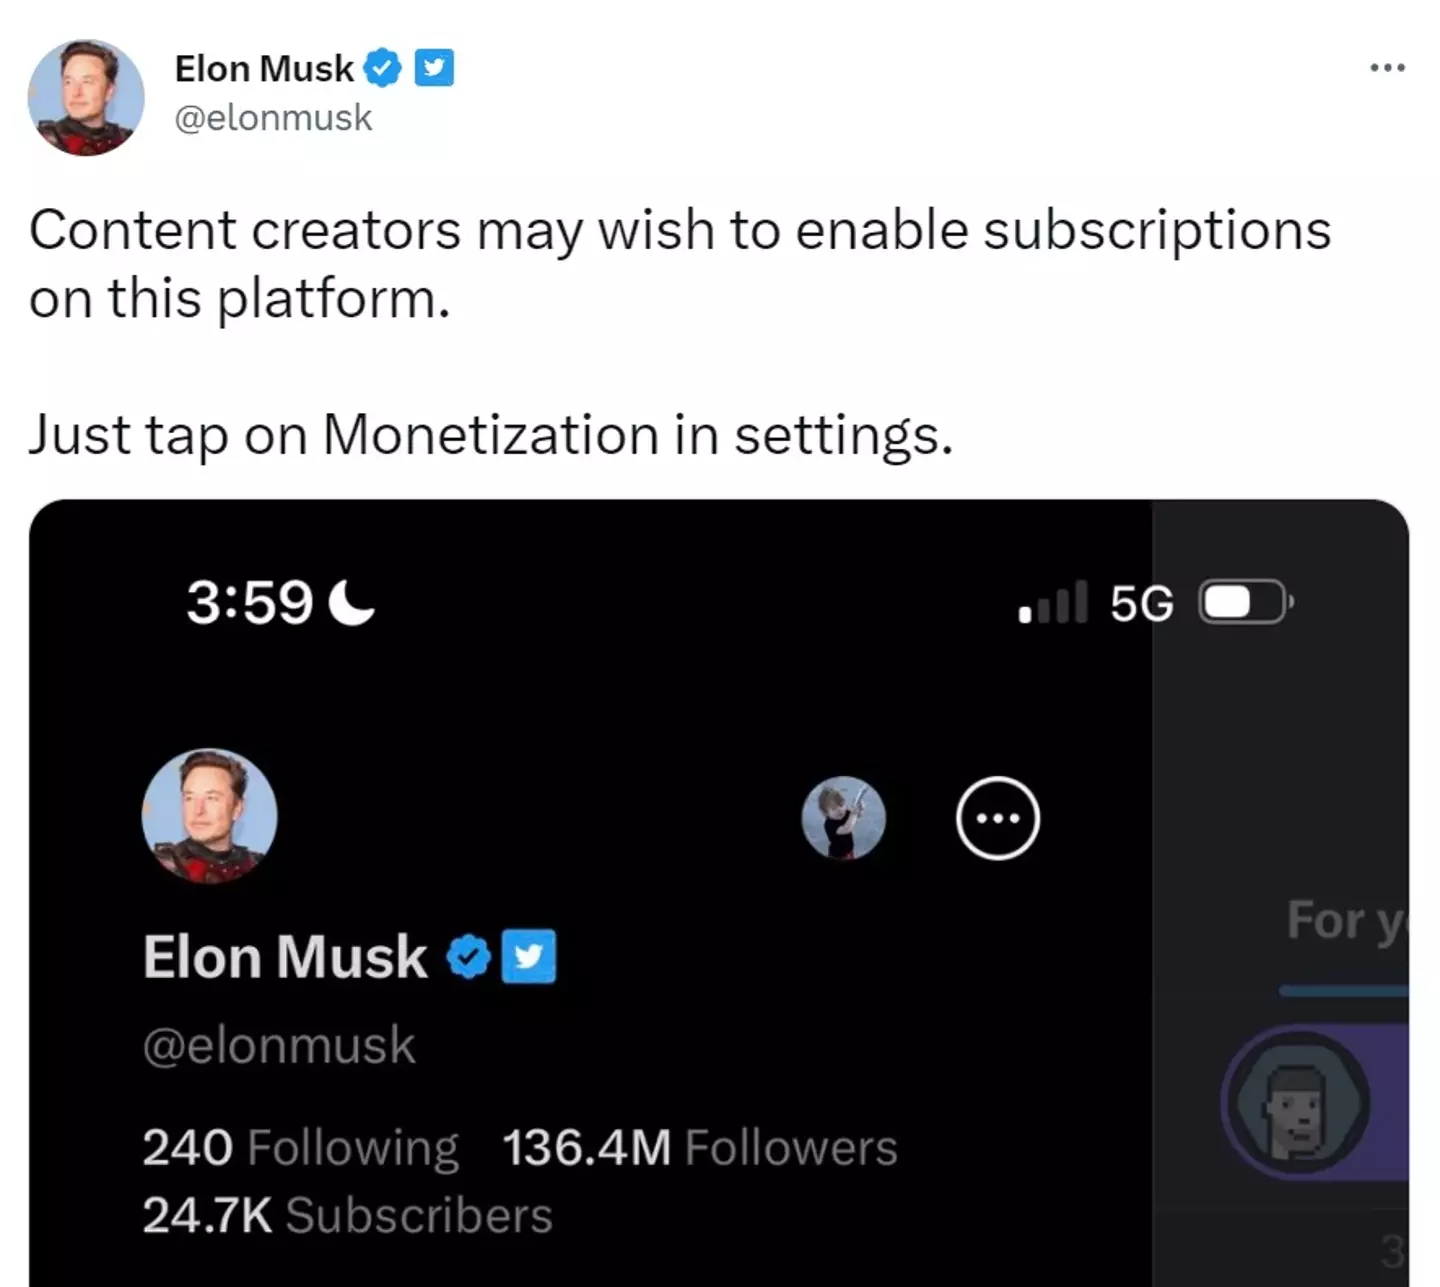 People first spotted the possible alternative account when Elon Musk tweeted about subscriptions.